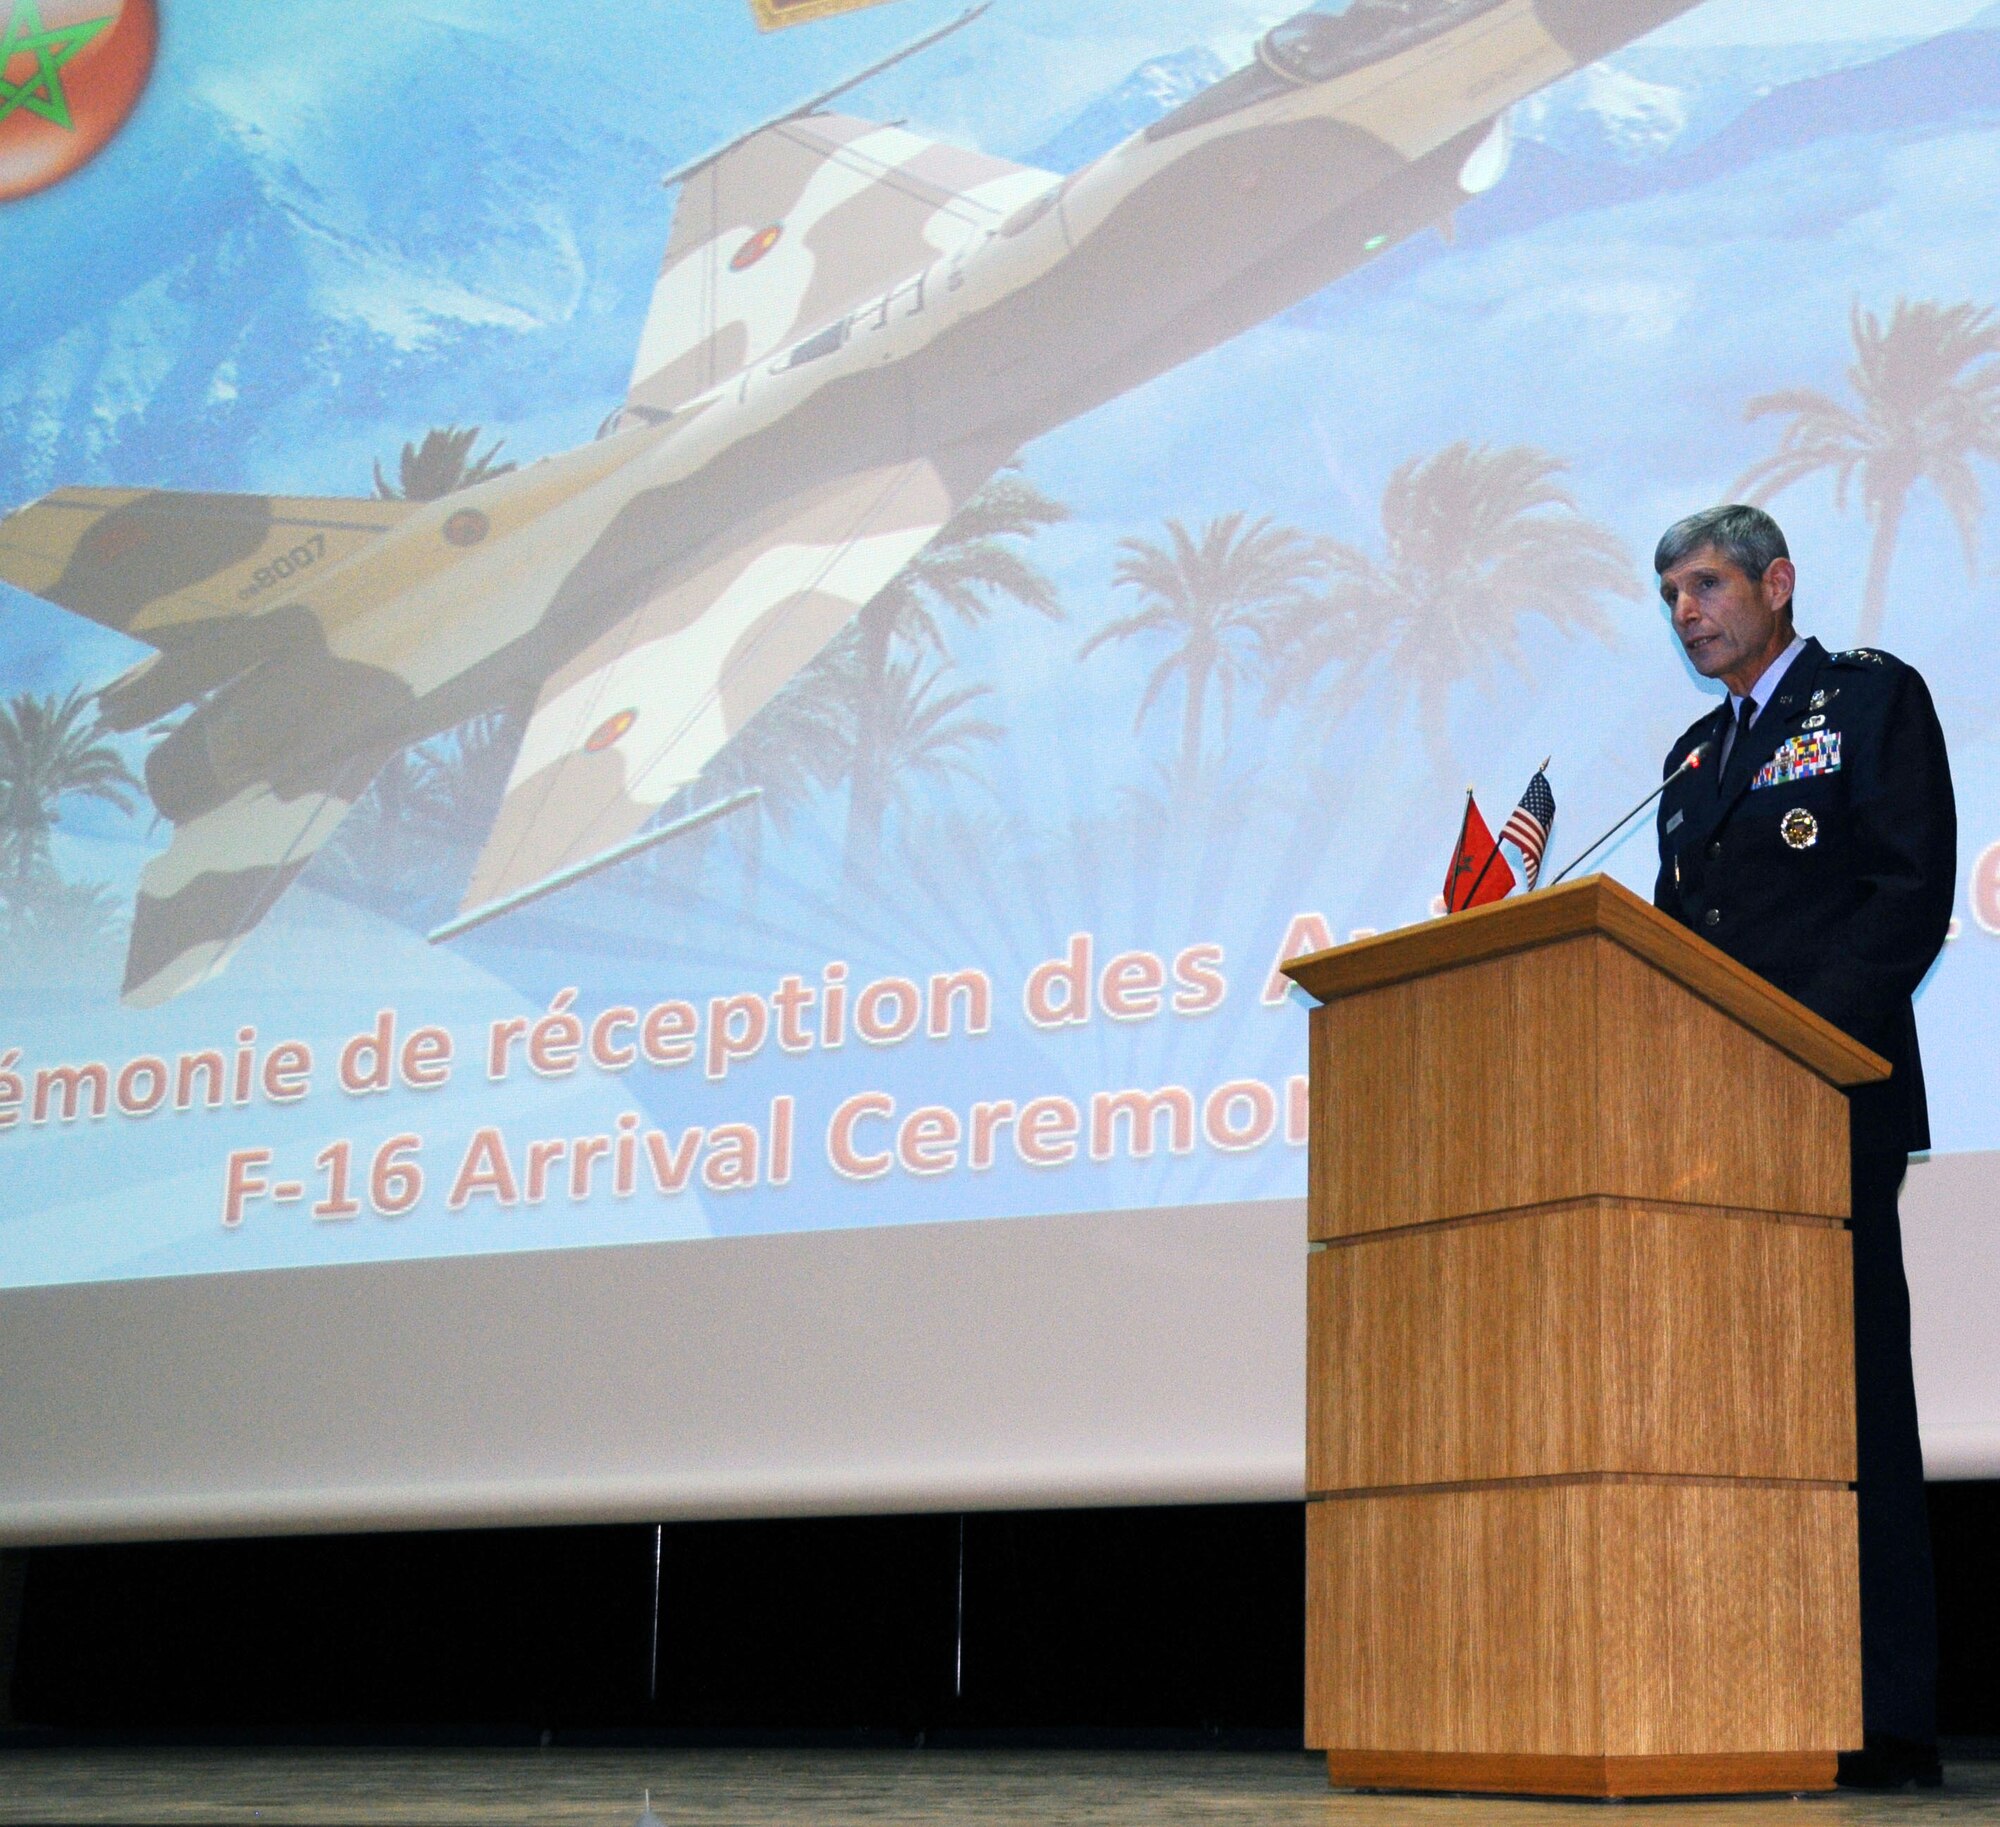 Air Force Chief of Staff Gen. Norton Schwartz speaks during an aircraft delivery ceremony Aug. 4, 2011, at Ben Guerrir Air Base, Morocco.  The Royal Moroccan Air Force unveiled the first four of 24 F-16 Fighting Falcons and is expected to receive the rest of the deliveries by 2013. (U.S. Air Force photo/Staff Sgt. Stefanie Torres)


